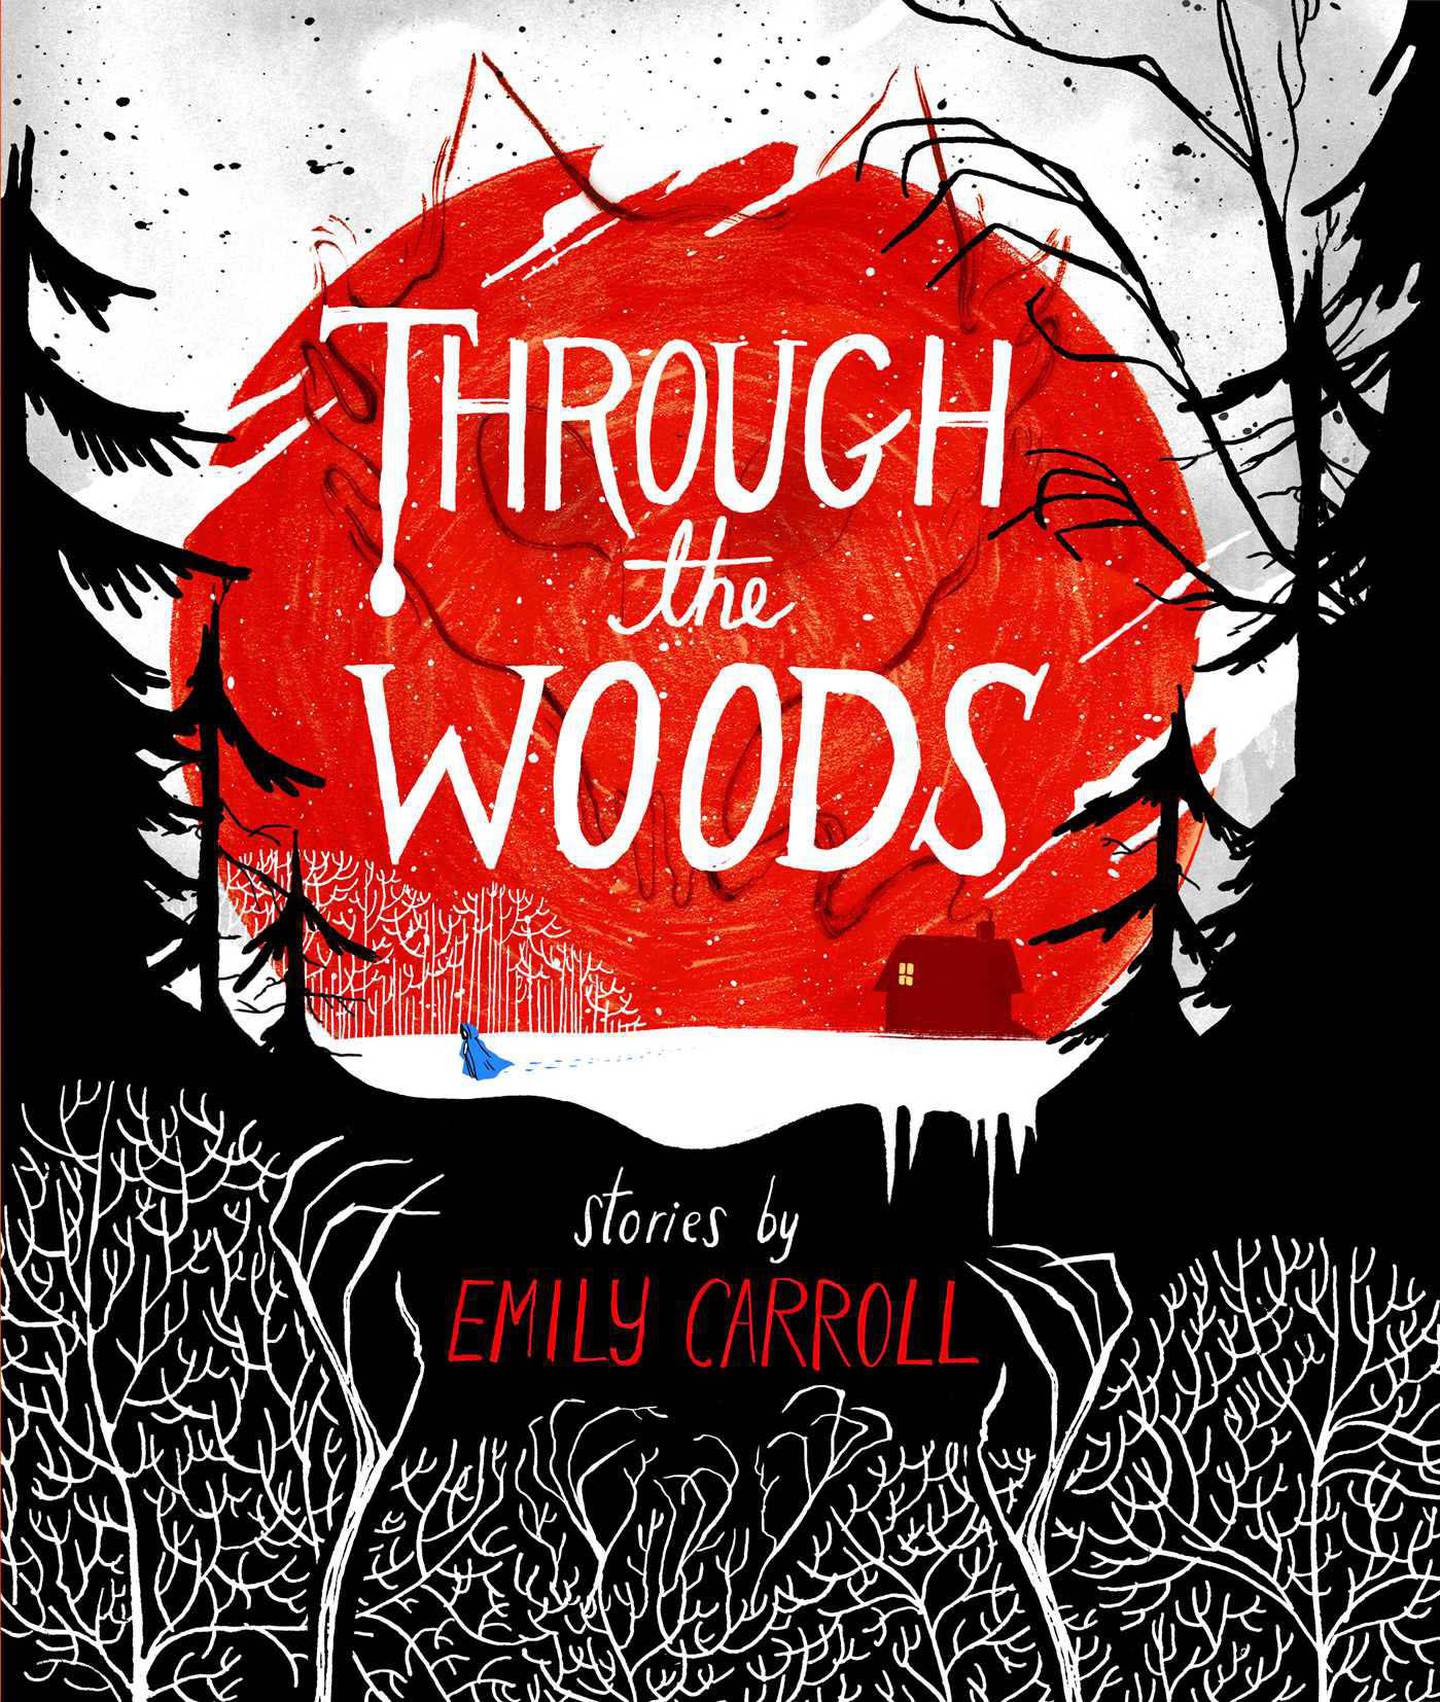 Through the Woods by Emily Carroll published by Margaret K. McElderry Books. Courtesy Simon & Schuster